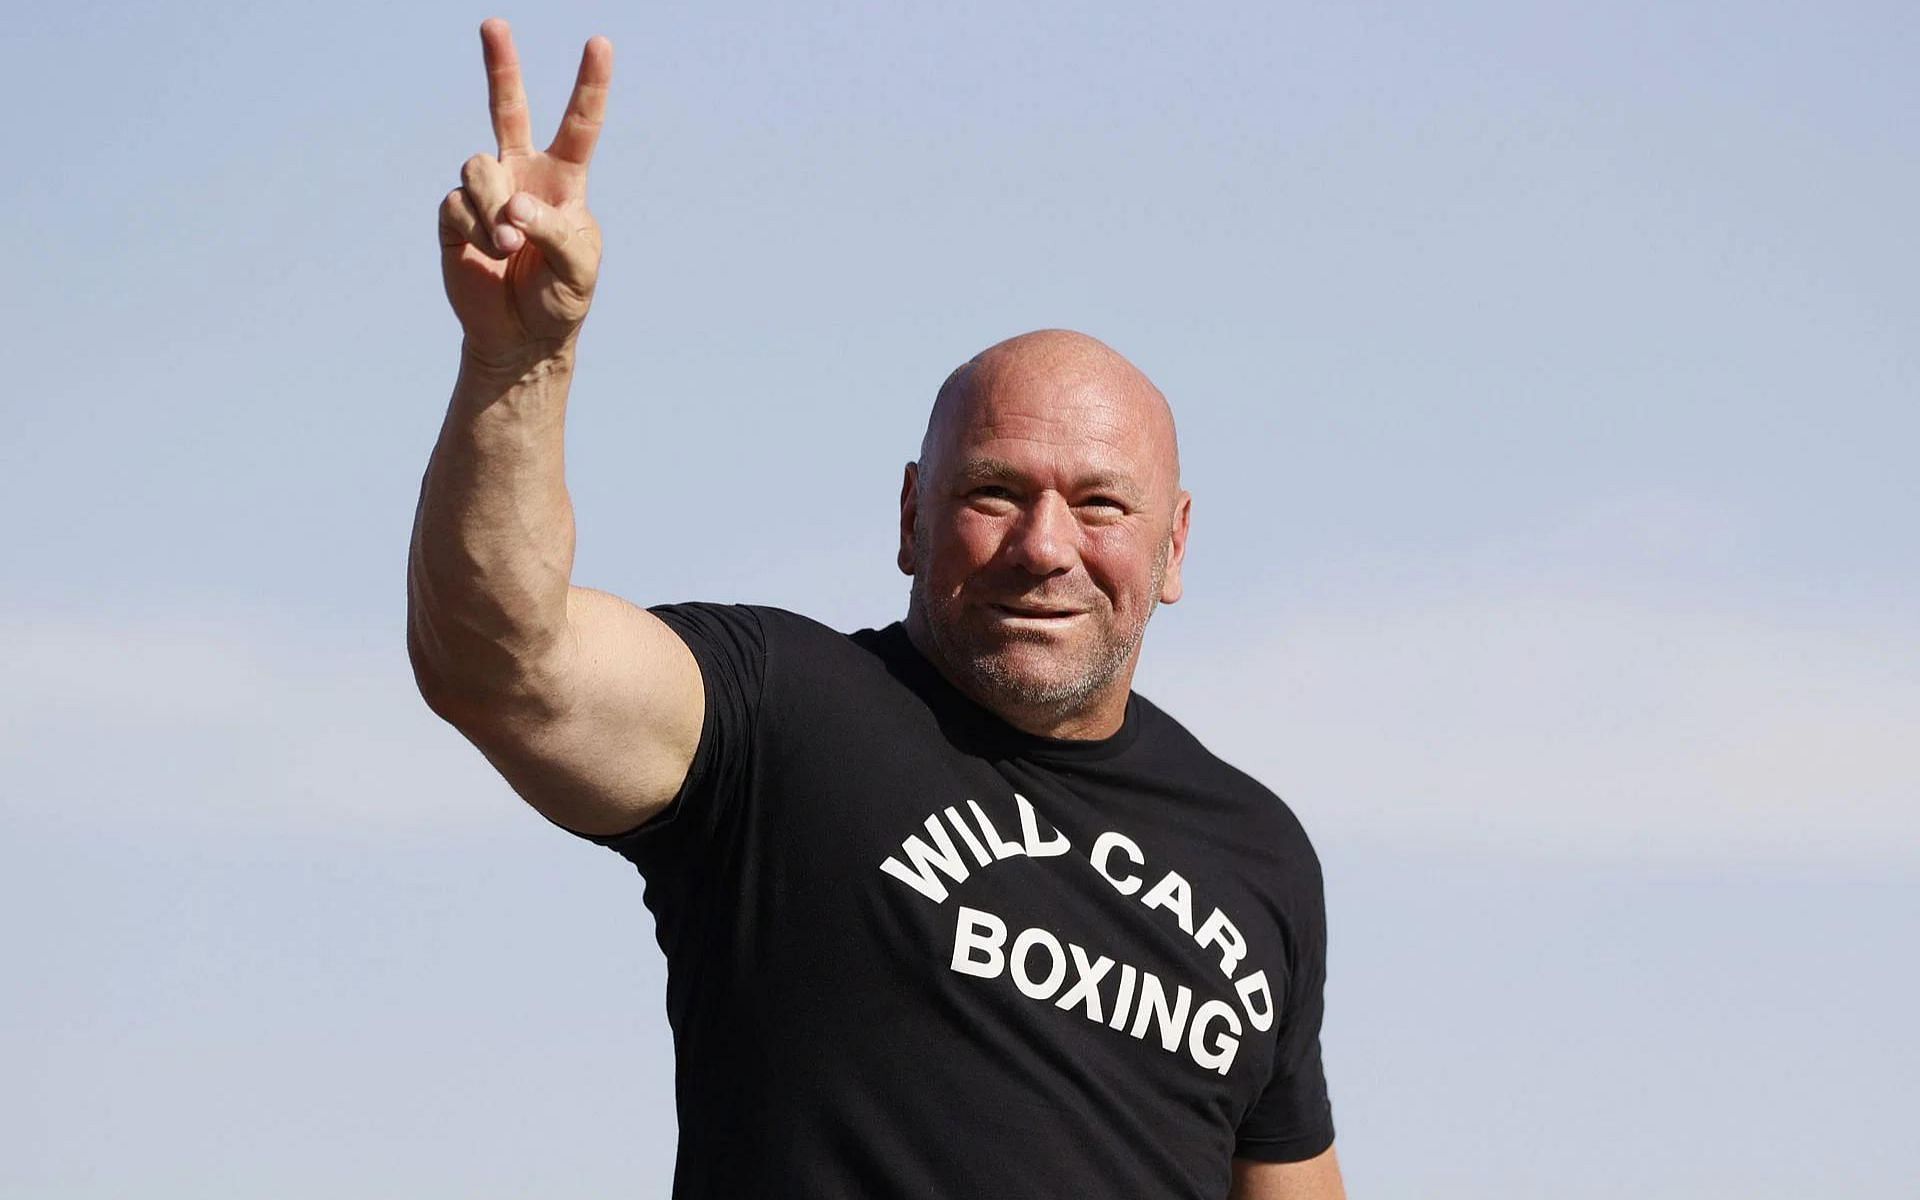 Dana White recently spoke about the aftermath of UFC being sold to Endeavor